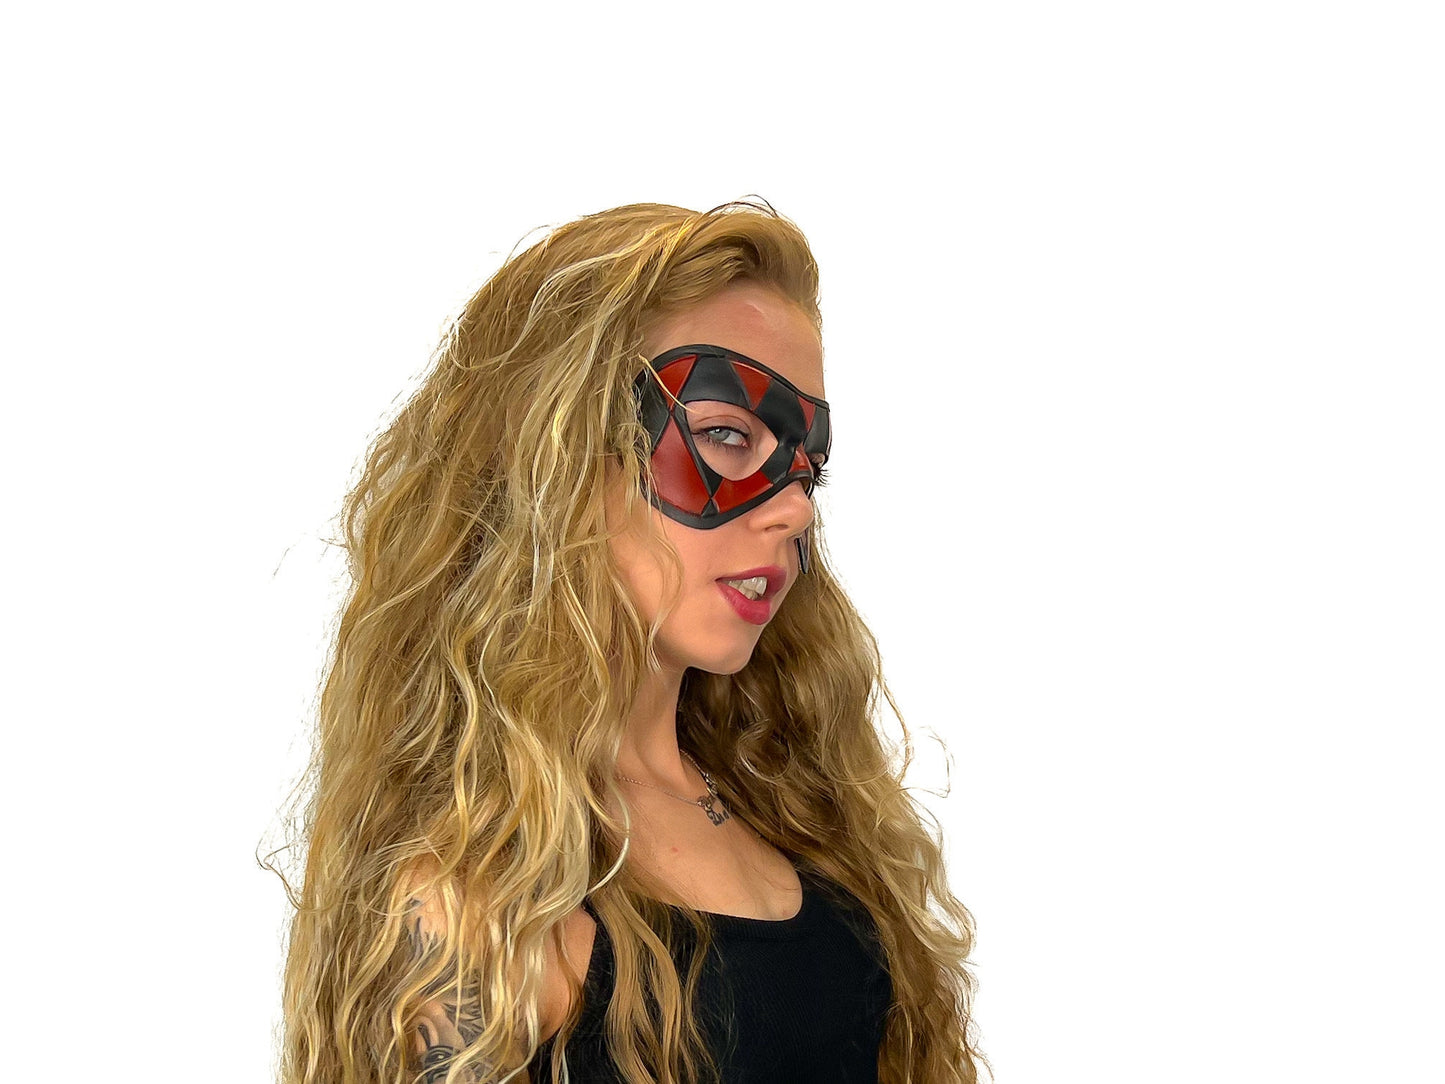 Compact Harlequin Handmade Genuine Leather Mask in Red and Black